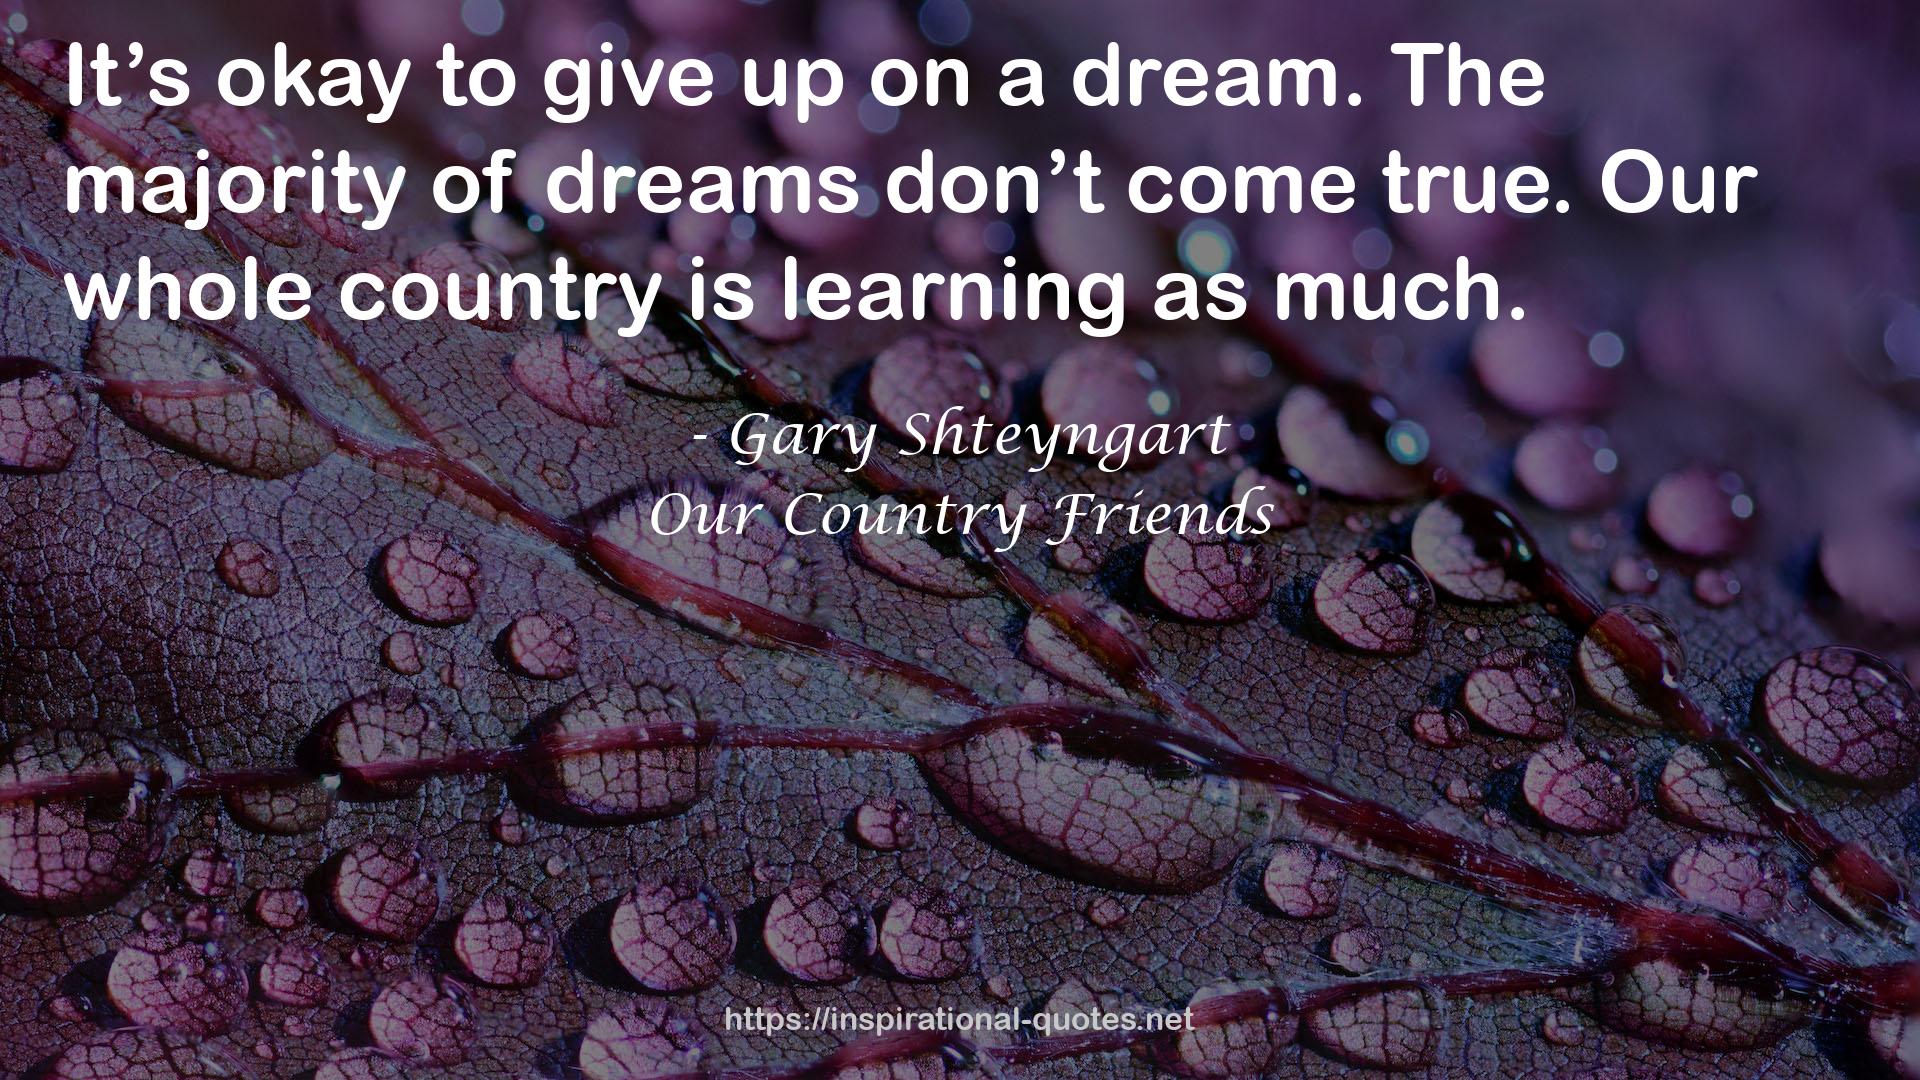 Our Country Friends QUOTES